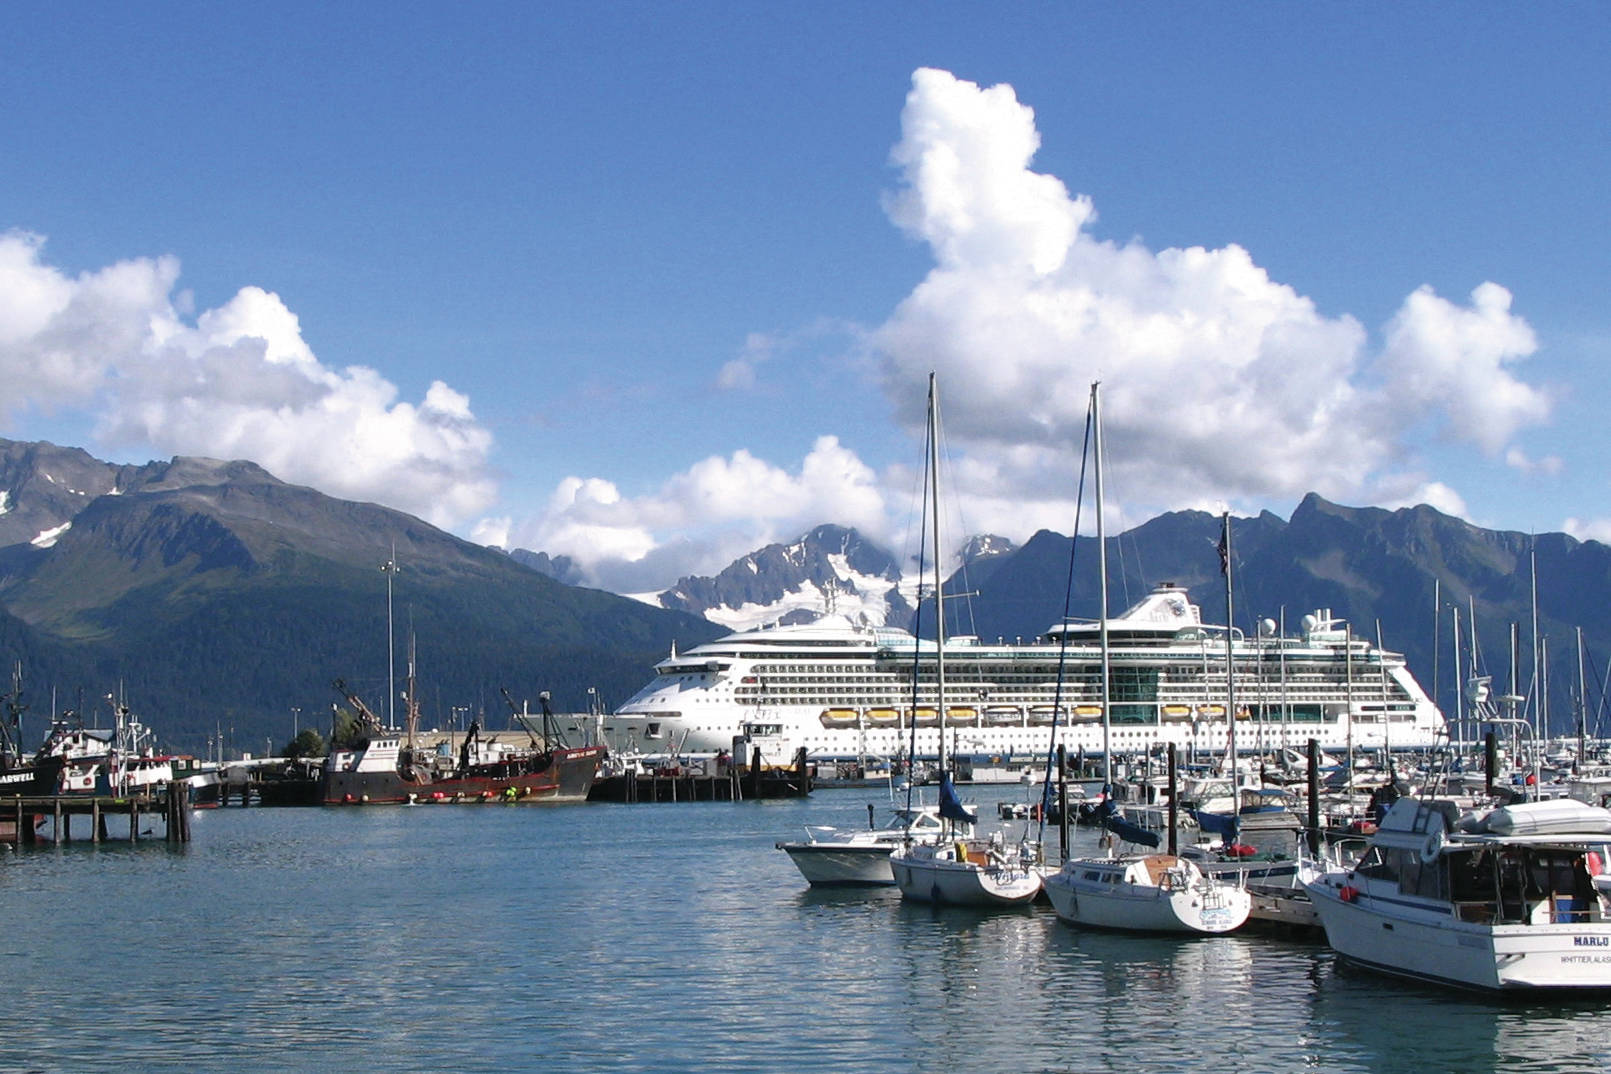 This Sept. 7, 2007, file photo shows Royal Caribbean’s “Radiance of the Seas” docked in Seward . (AP Photo/Beth J. Harpaz, File)